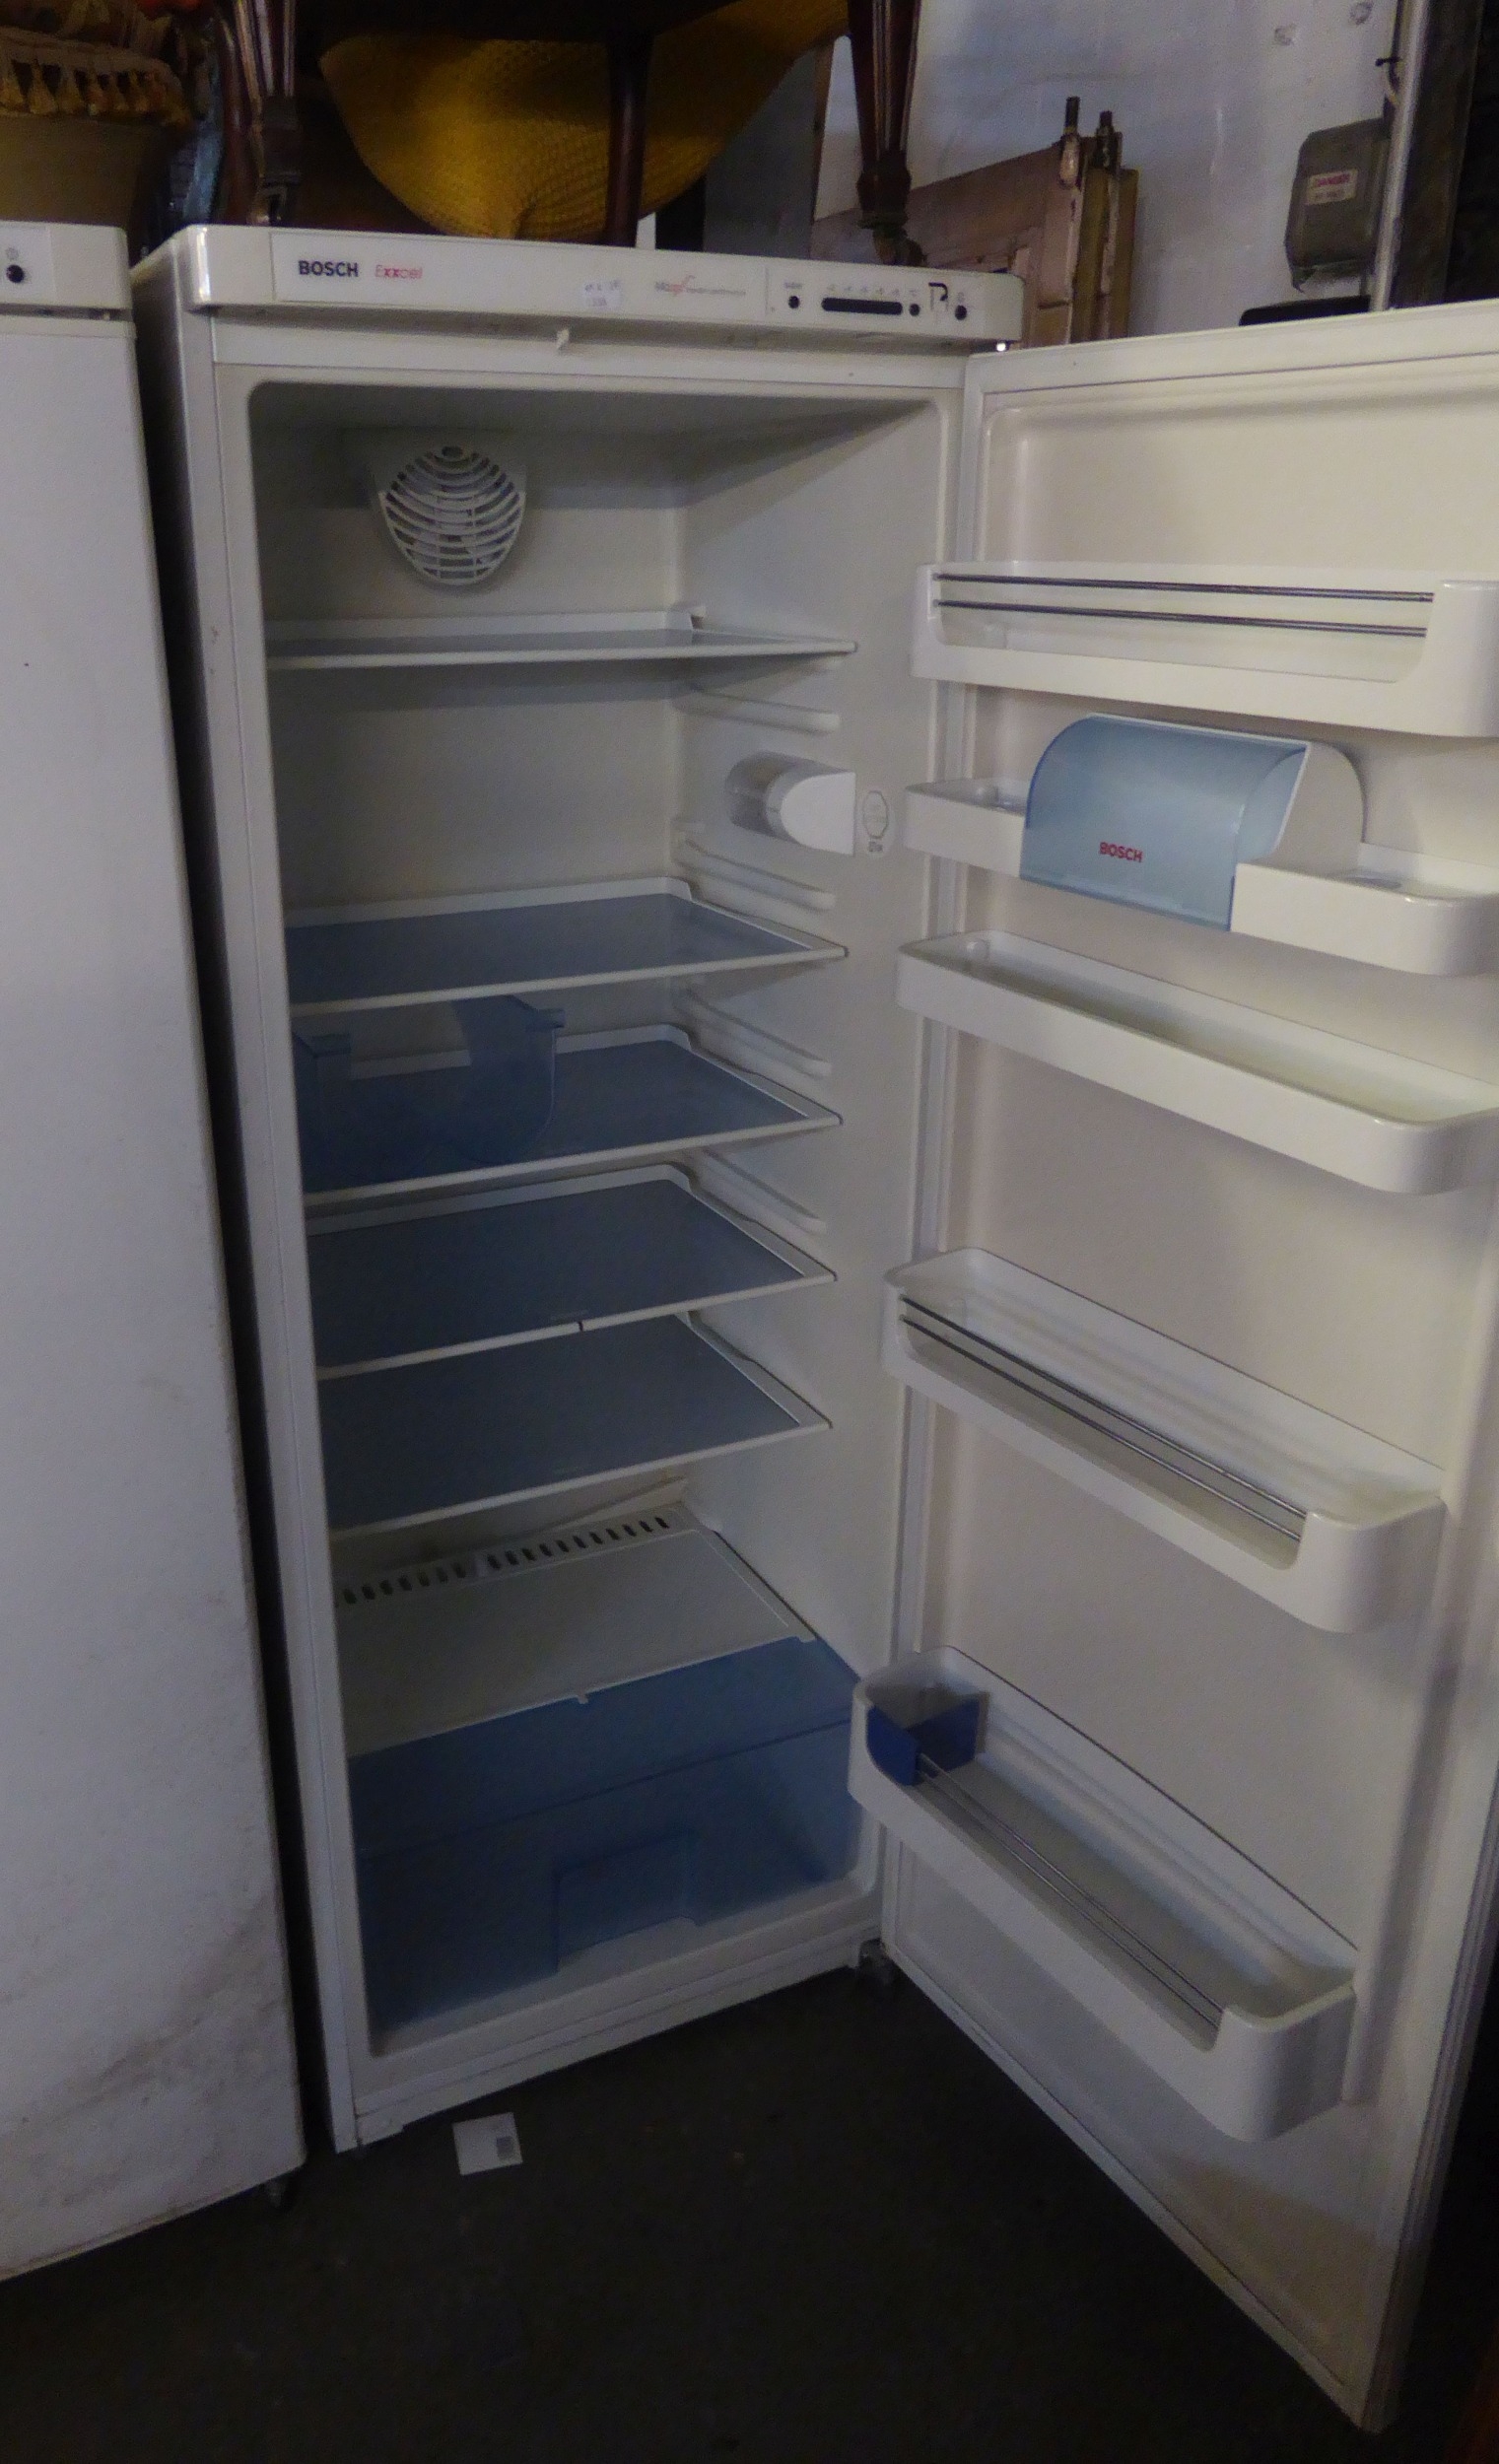 A BOSCH EXXCEL FROST FREE LARGE UPRIGHT FREEZER. TOGETHER WITH A MATCHING BOSCH EXXCEL FRIDGE (2) - Image 3 of 3